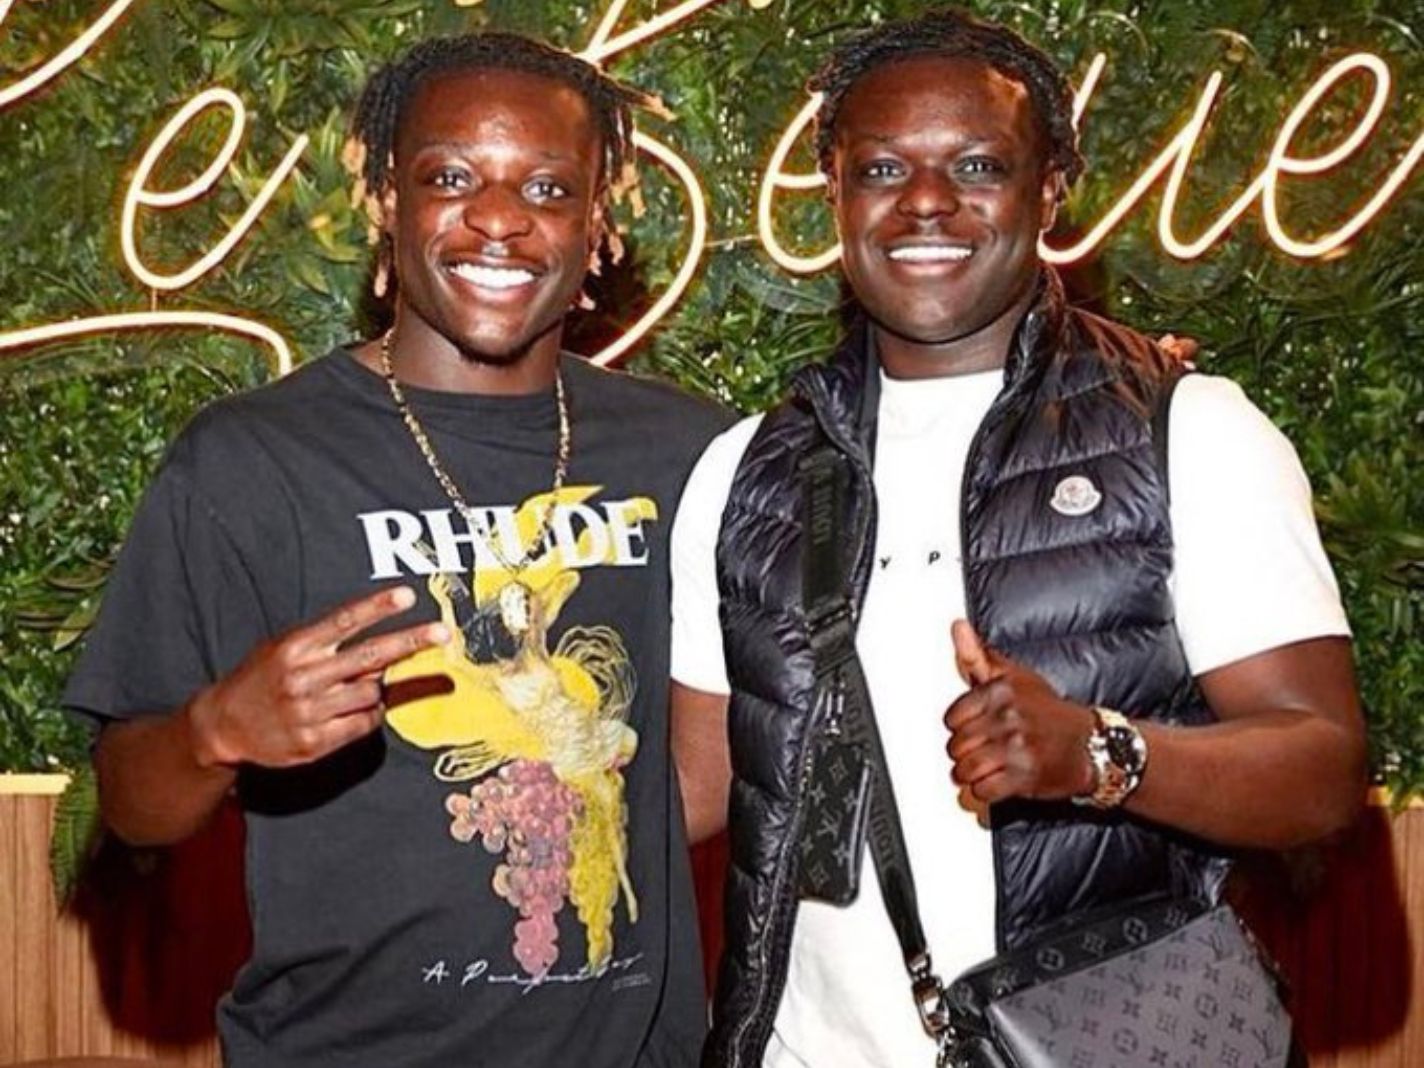 Get to Know Jefferson Doku, the Older Brother Behind Jeremy’s Success